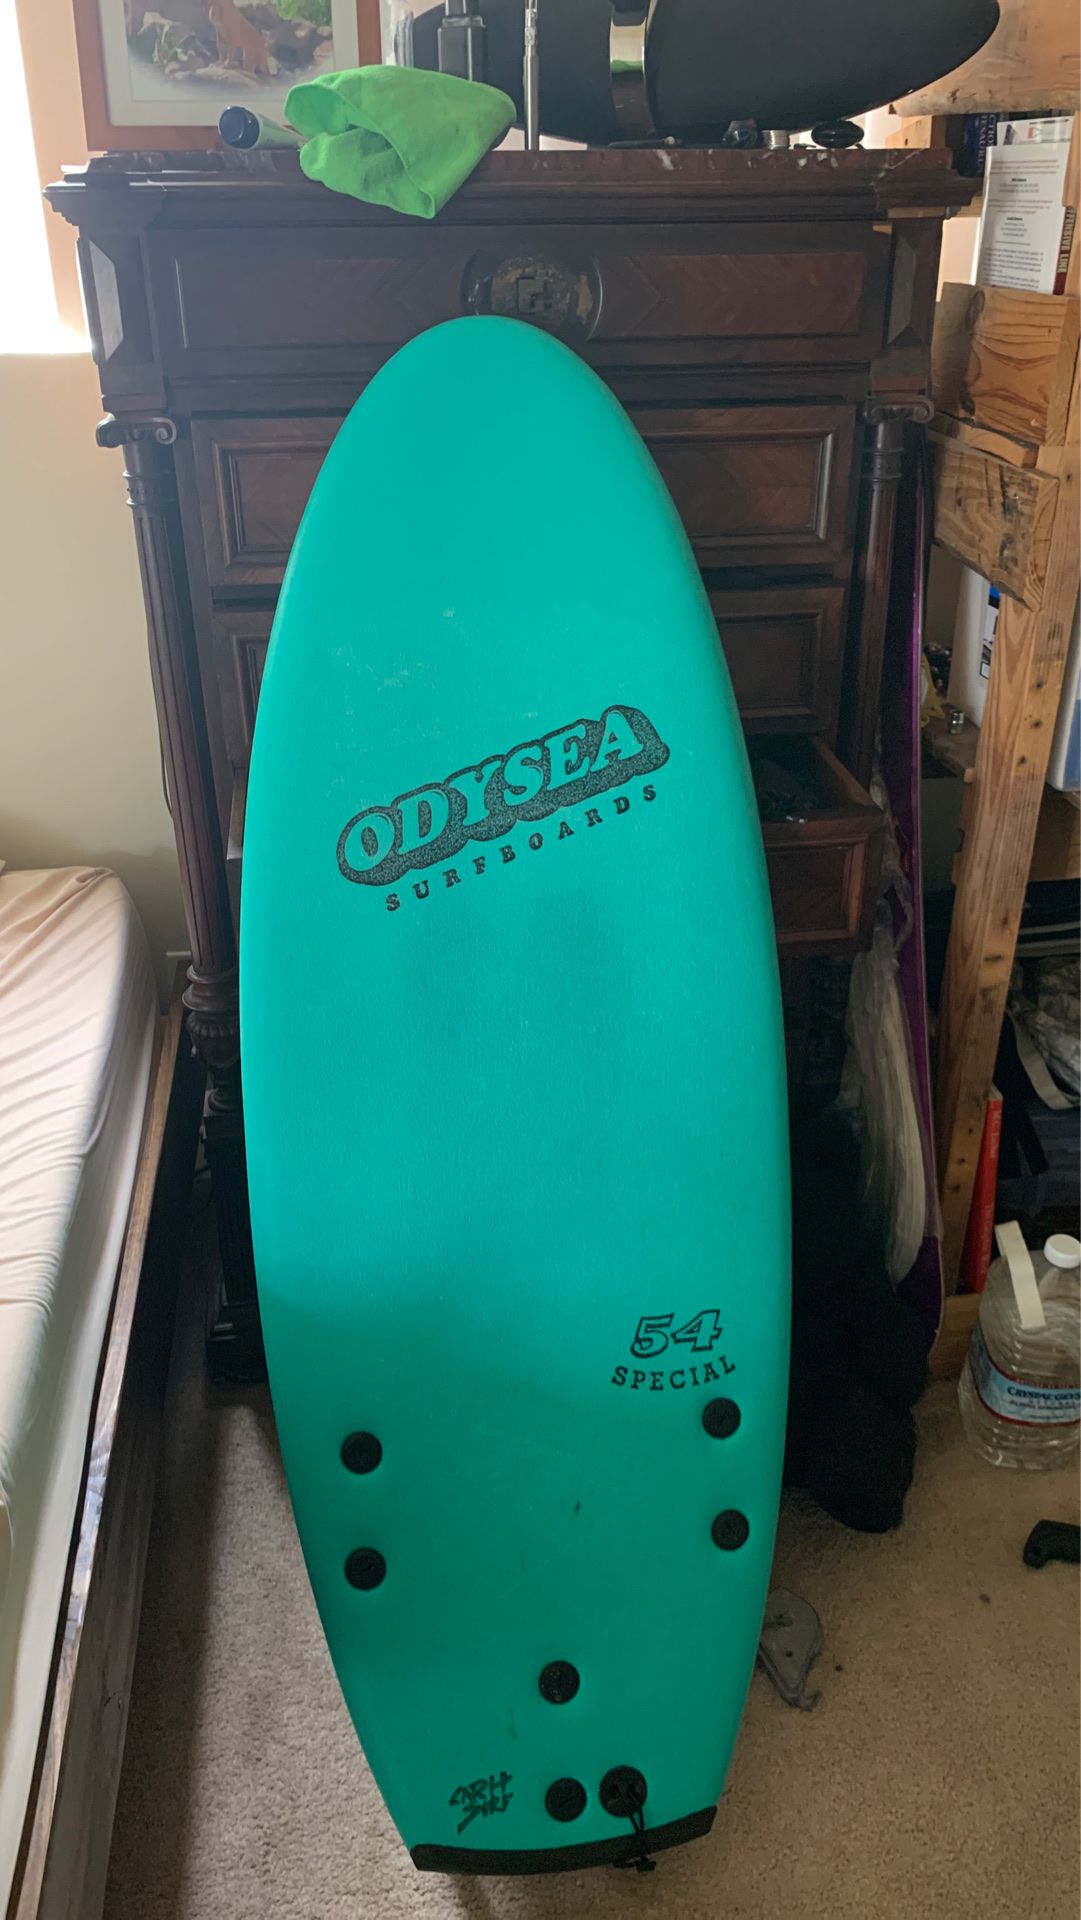 Catchsurf 54 special odysea surfboard